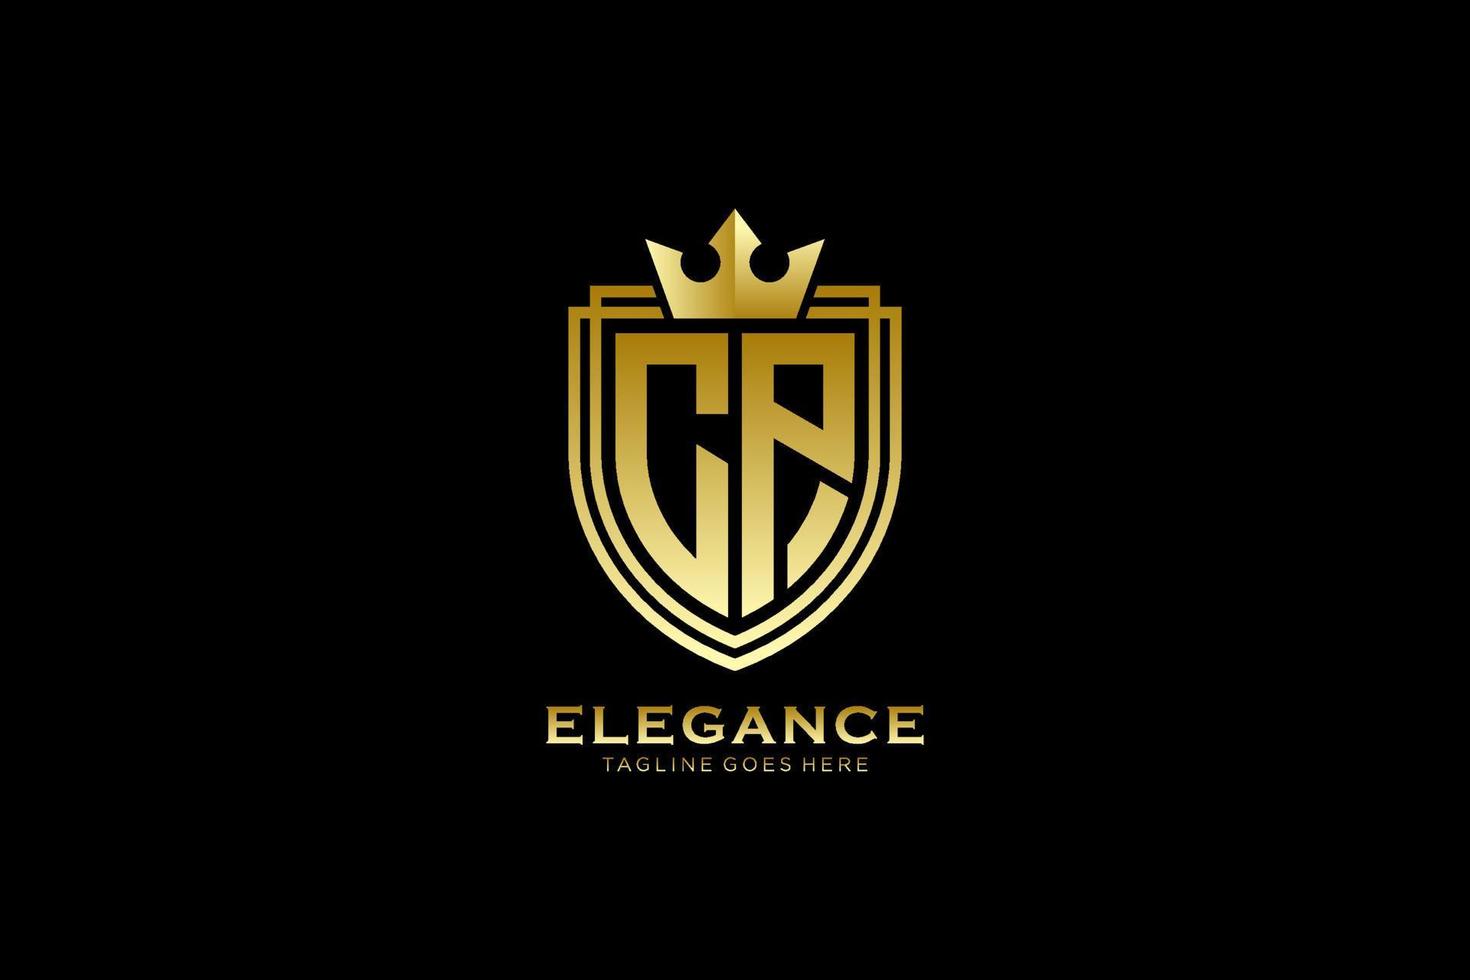 initial CP elegant luxury monogram logo or badge template with scrolls and royal crown - perfect for luxurious branding projects vector